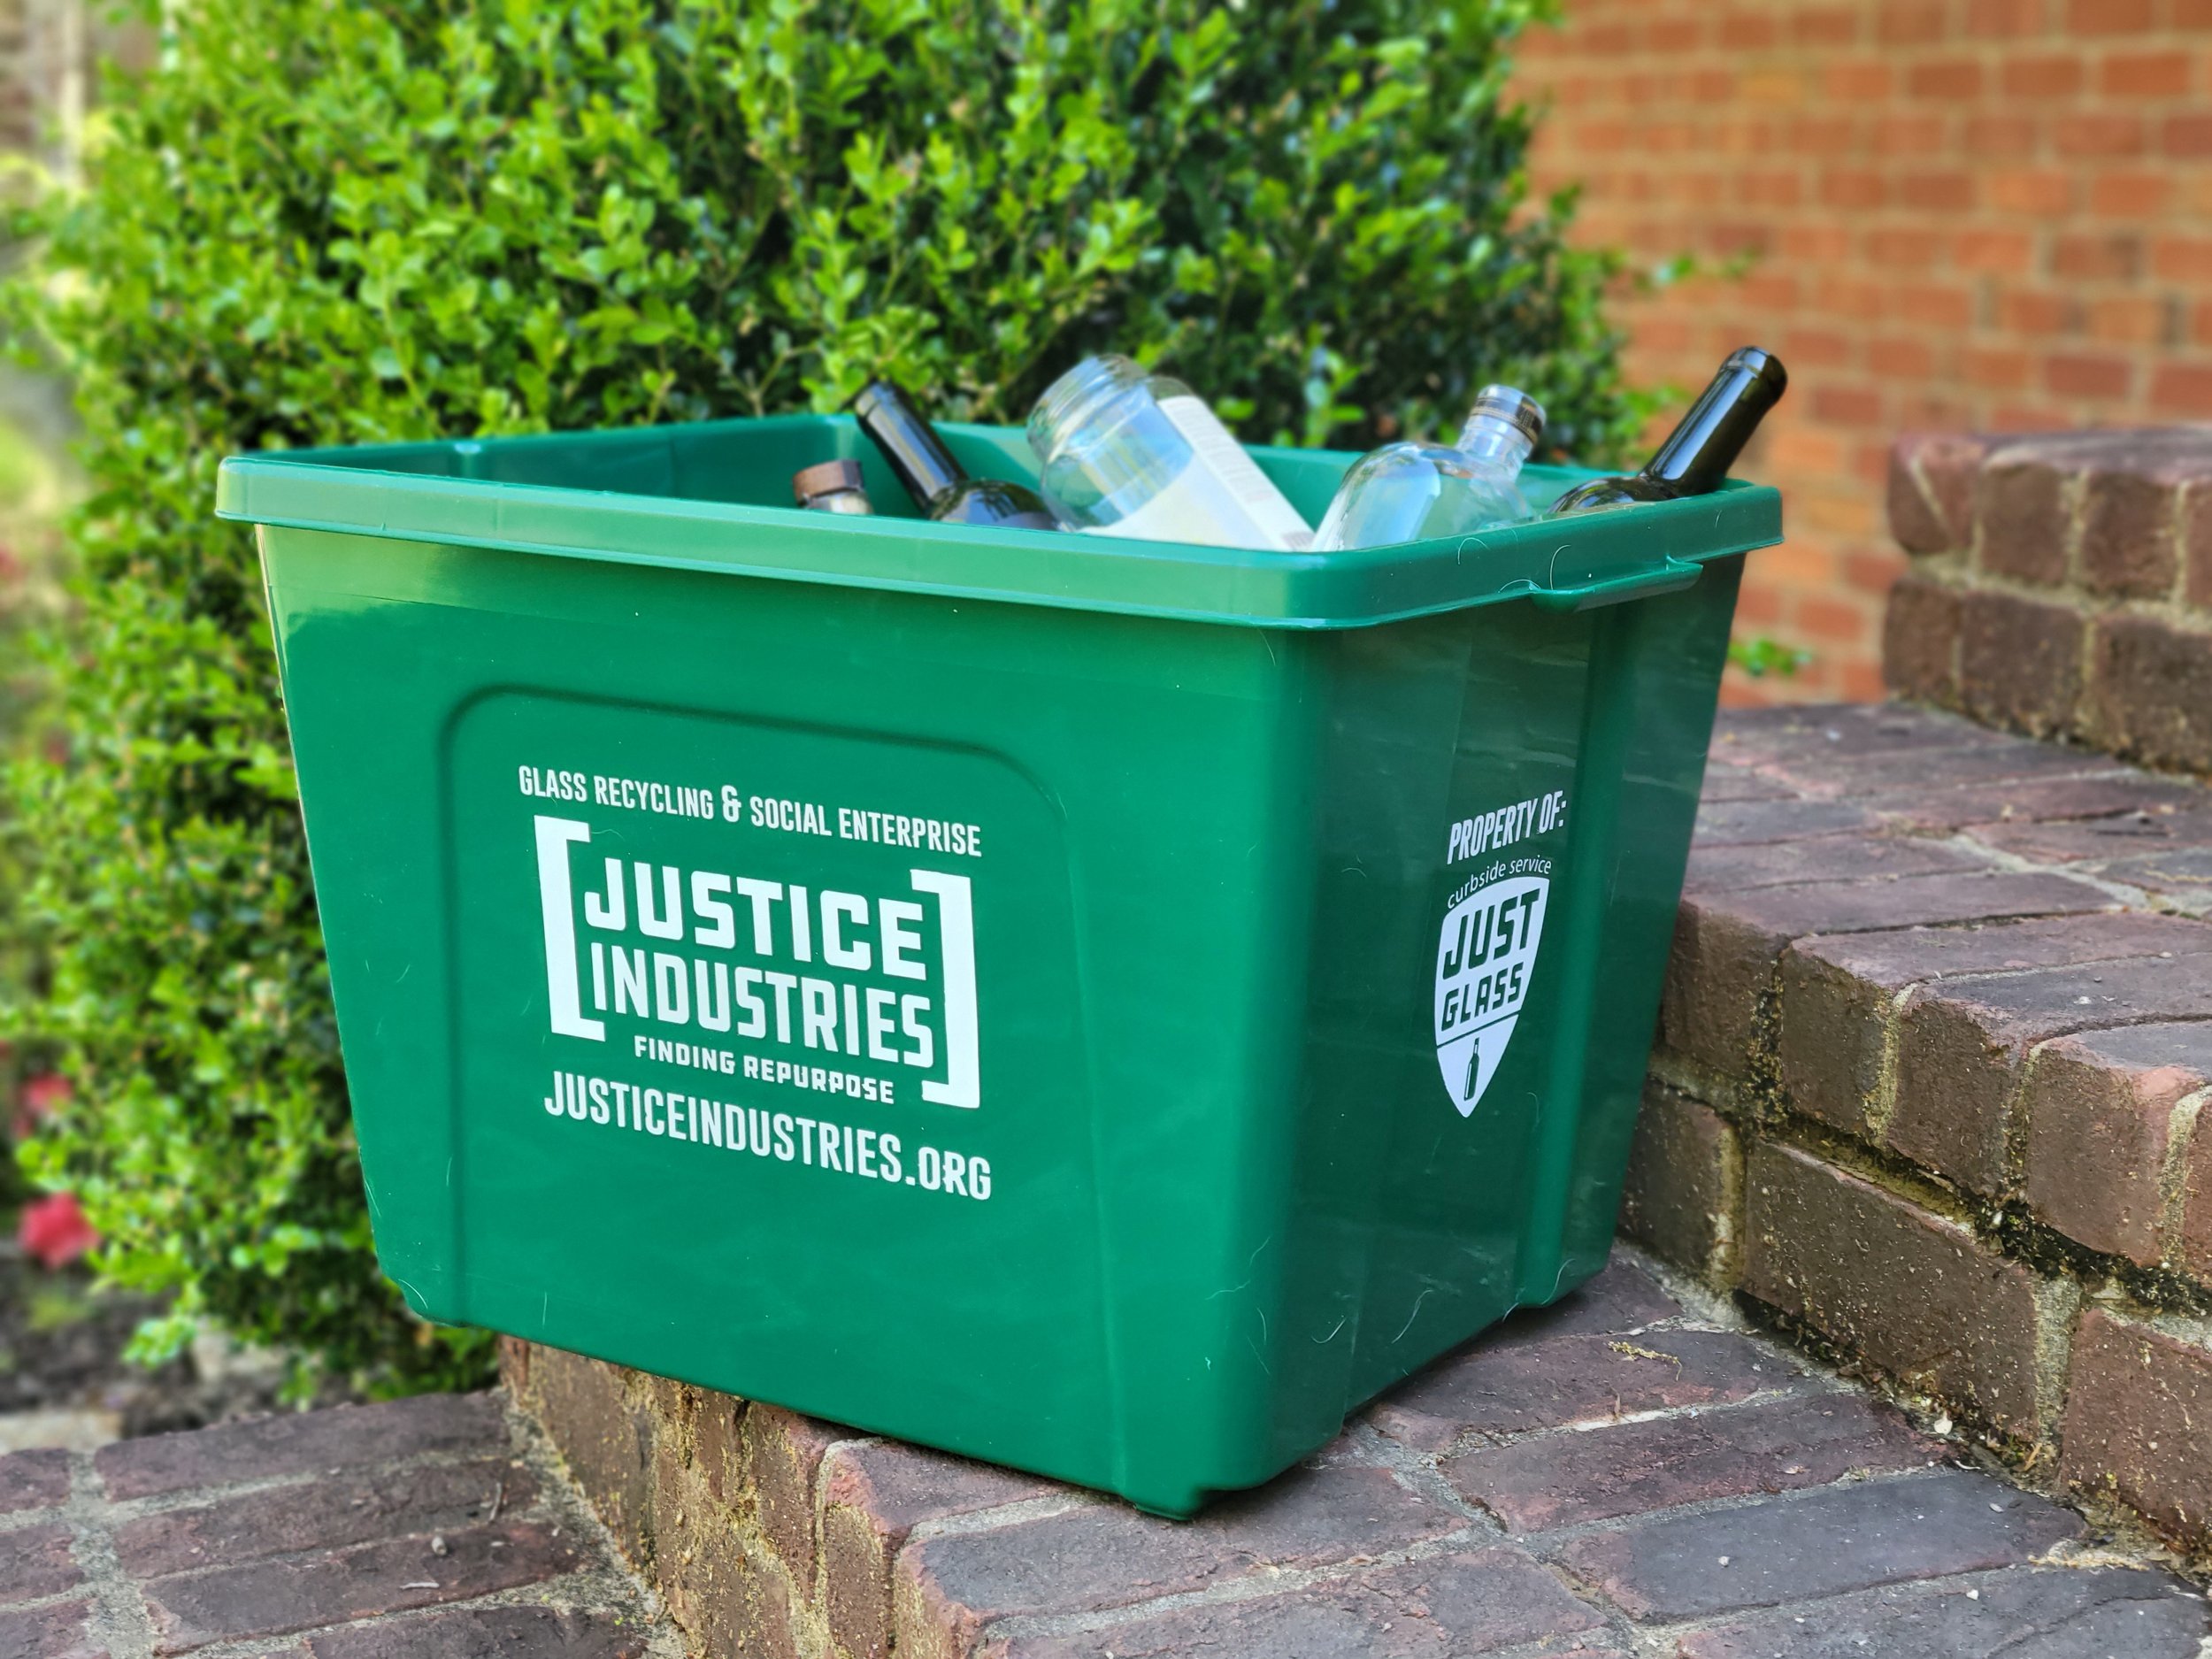 Curbside glass recycling bin by Justice Industries